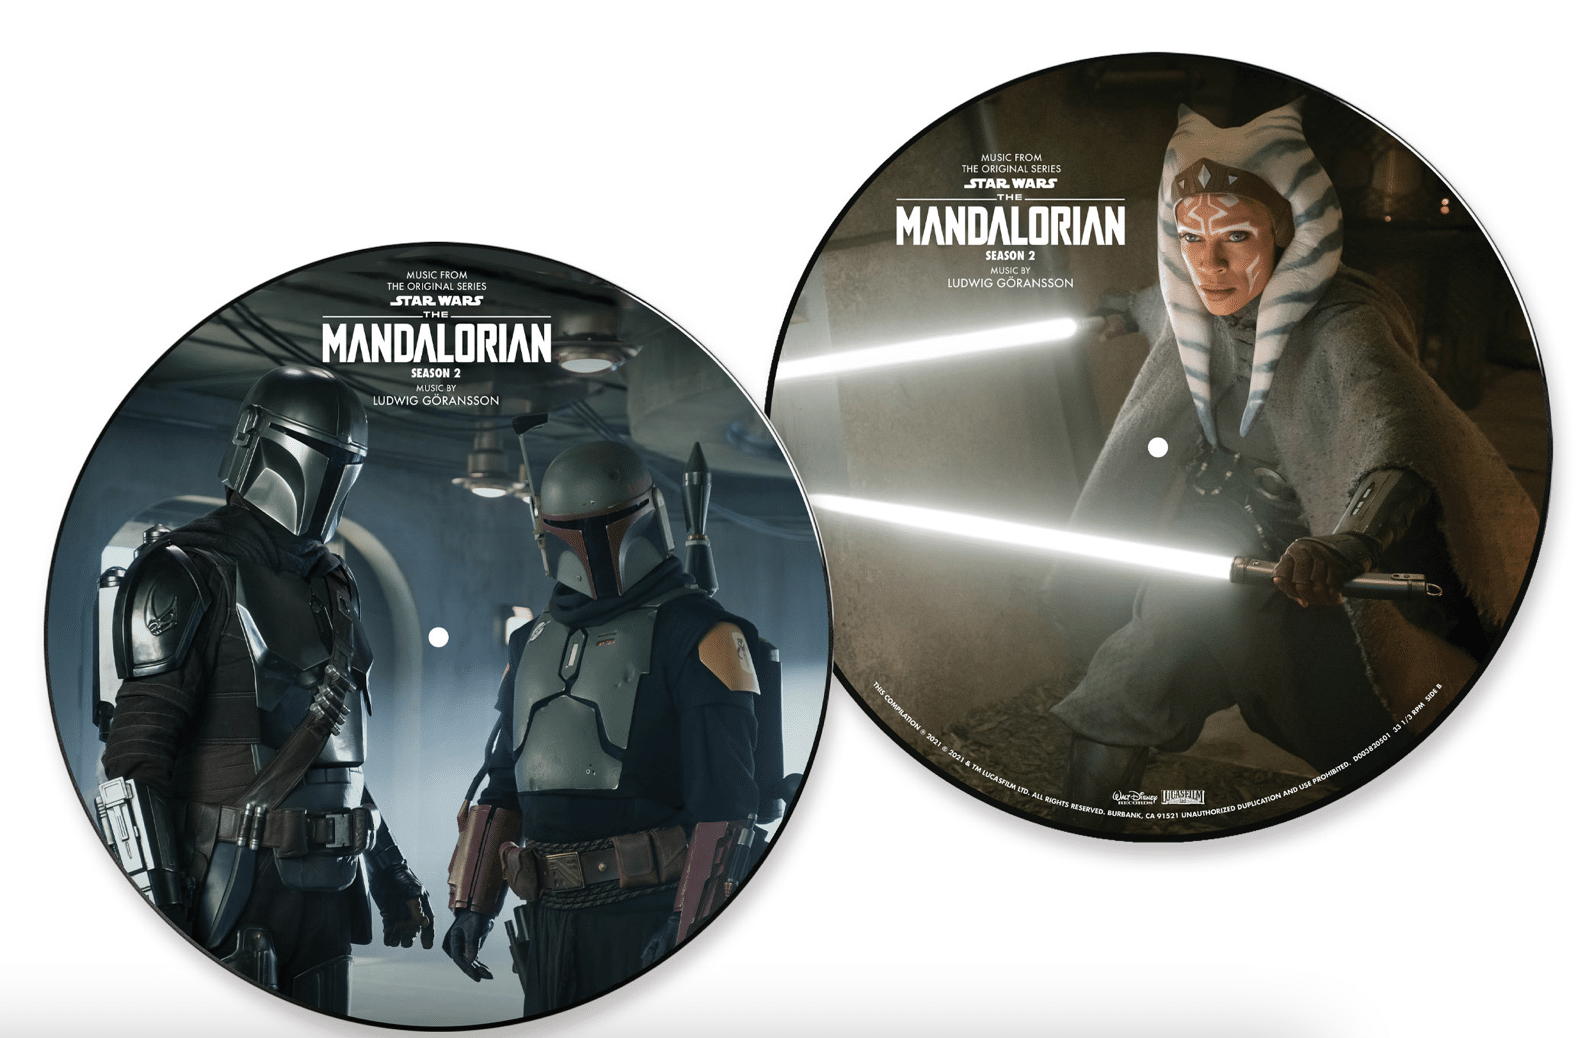 Ludwig Göransson - Music from The Mandalorian